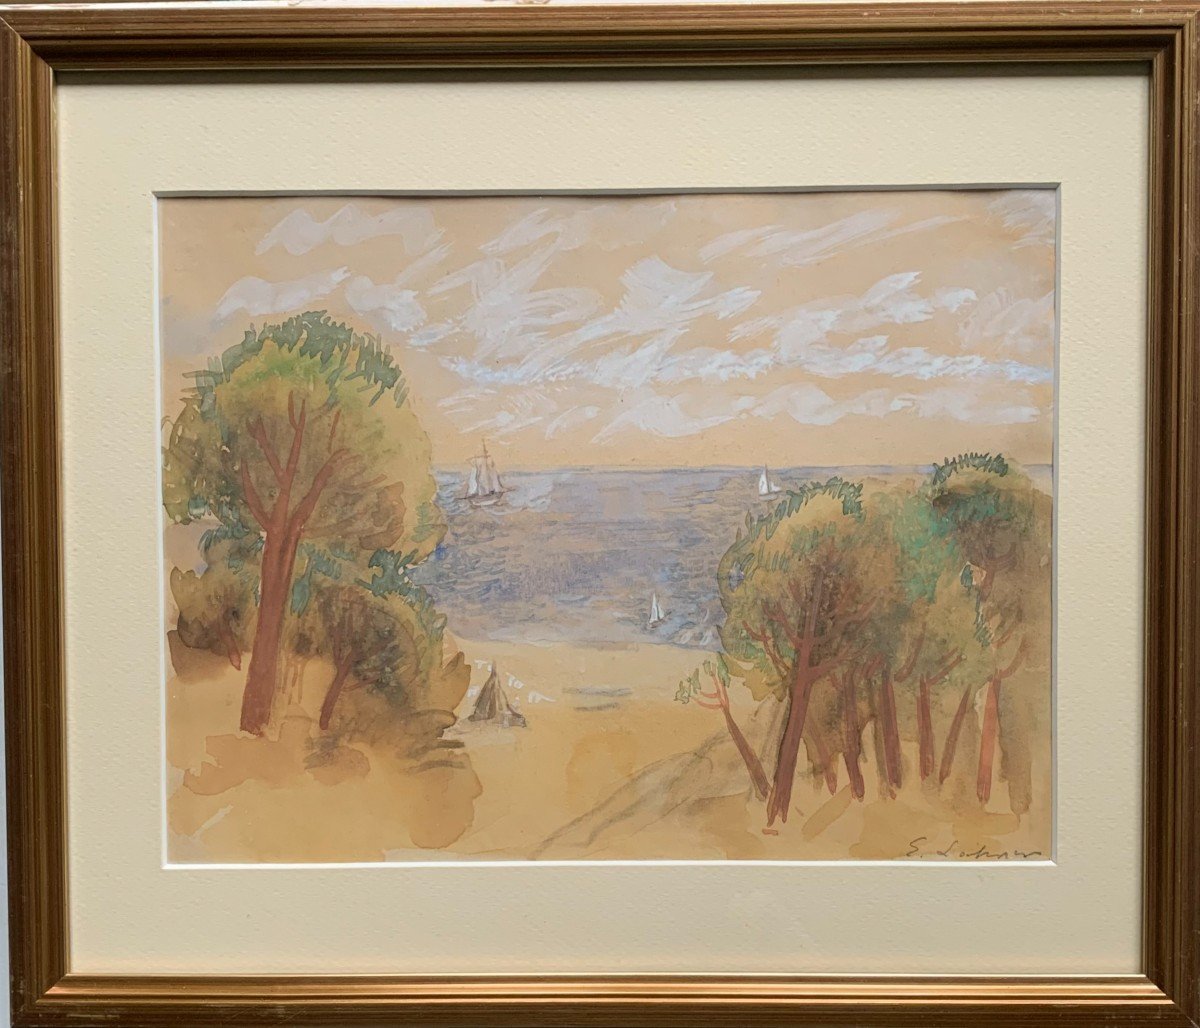 Edge Of The Mediterranean Watercolor Signed Emile Lahner XXth Century Hungarian School